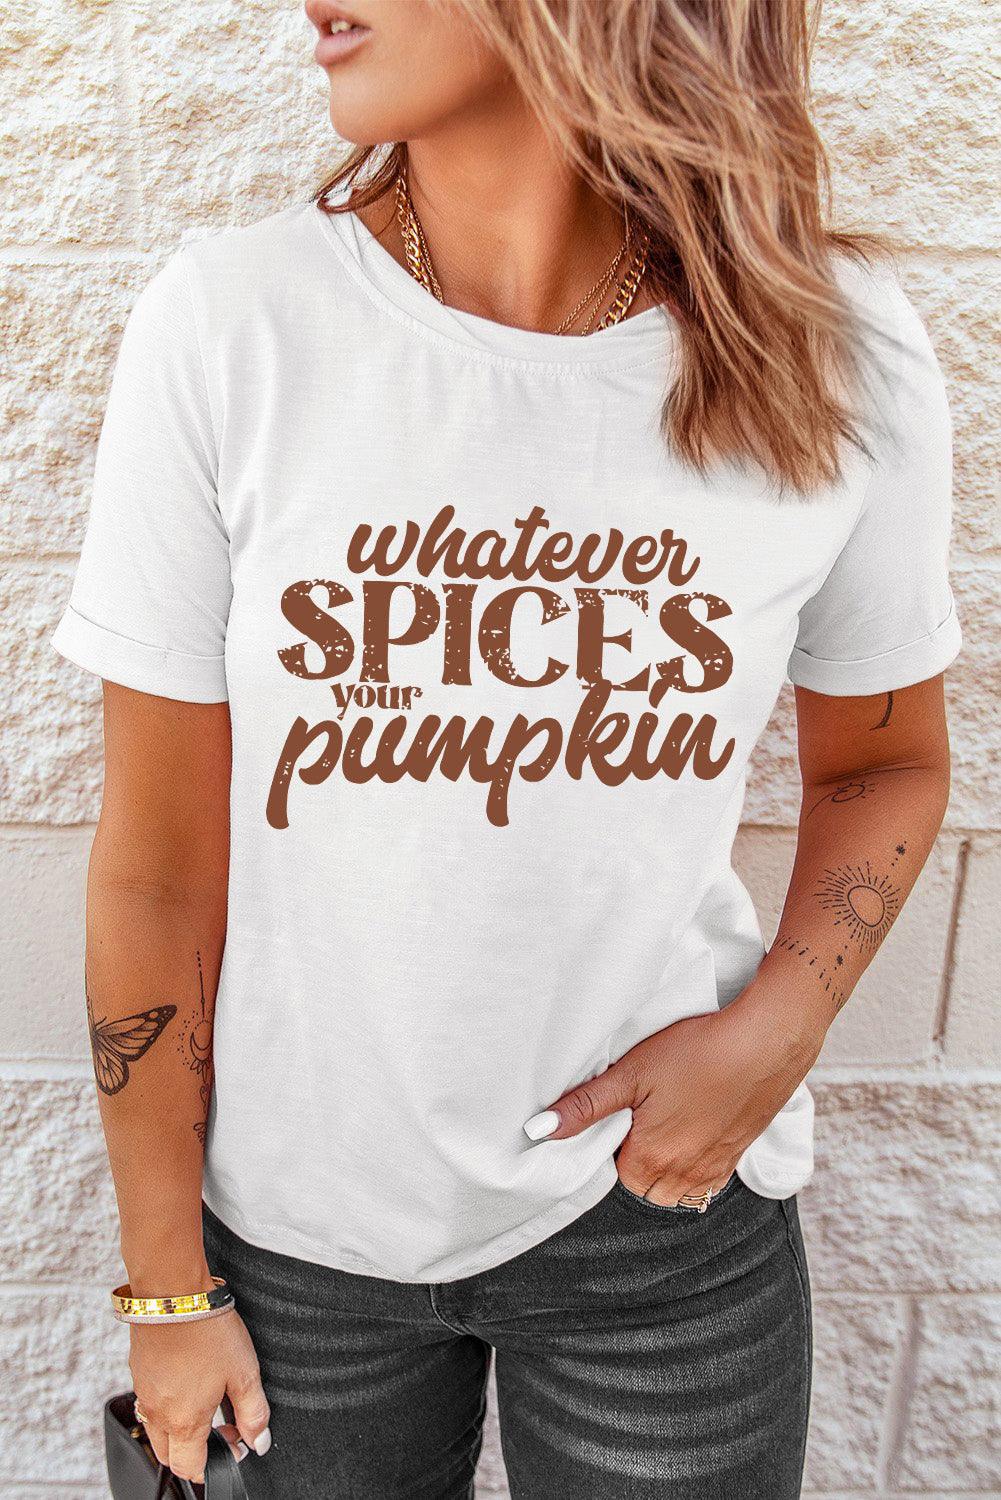 WHATEVER SPICES YOUR PUMPKIN Graphic Tee - Lab Fashion, Home & Health